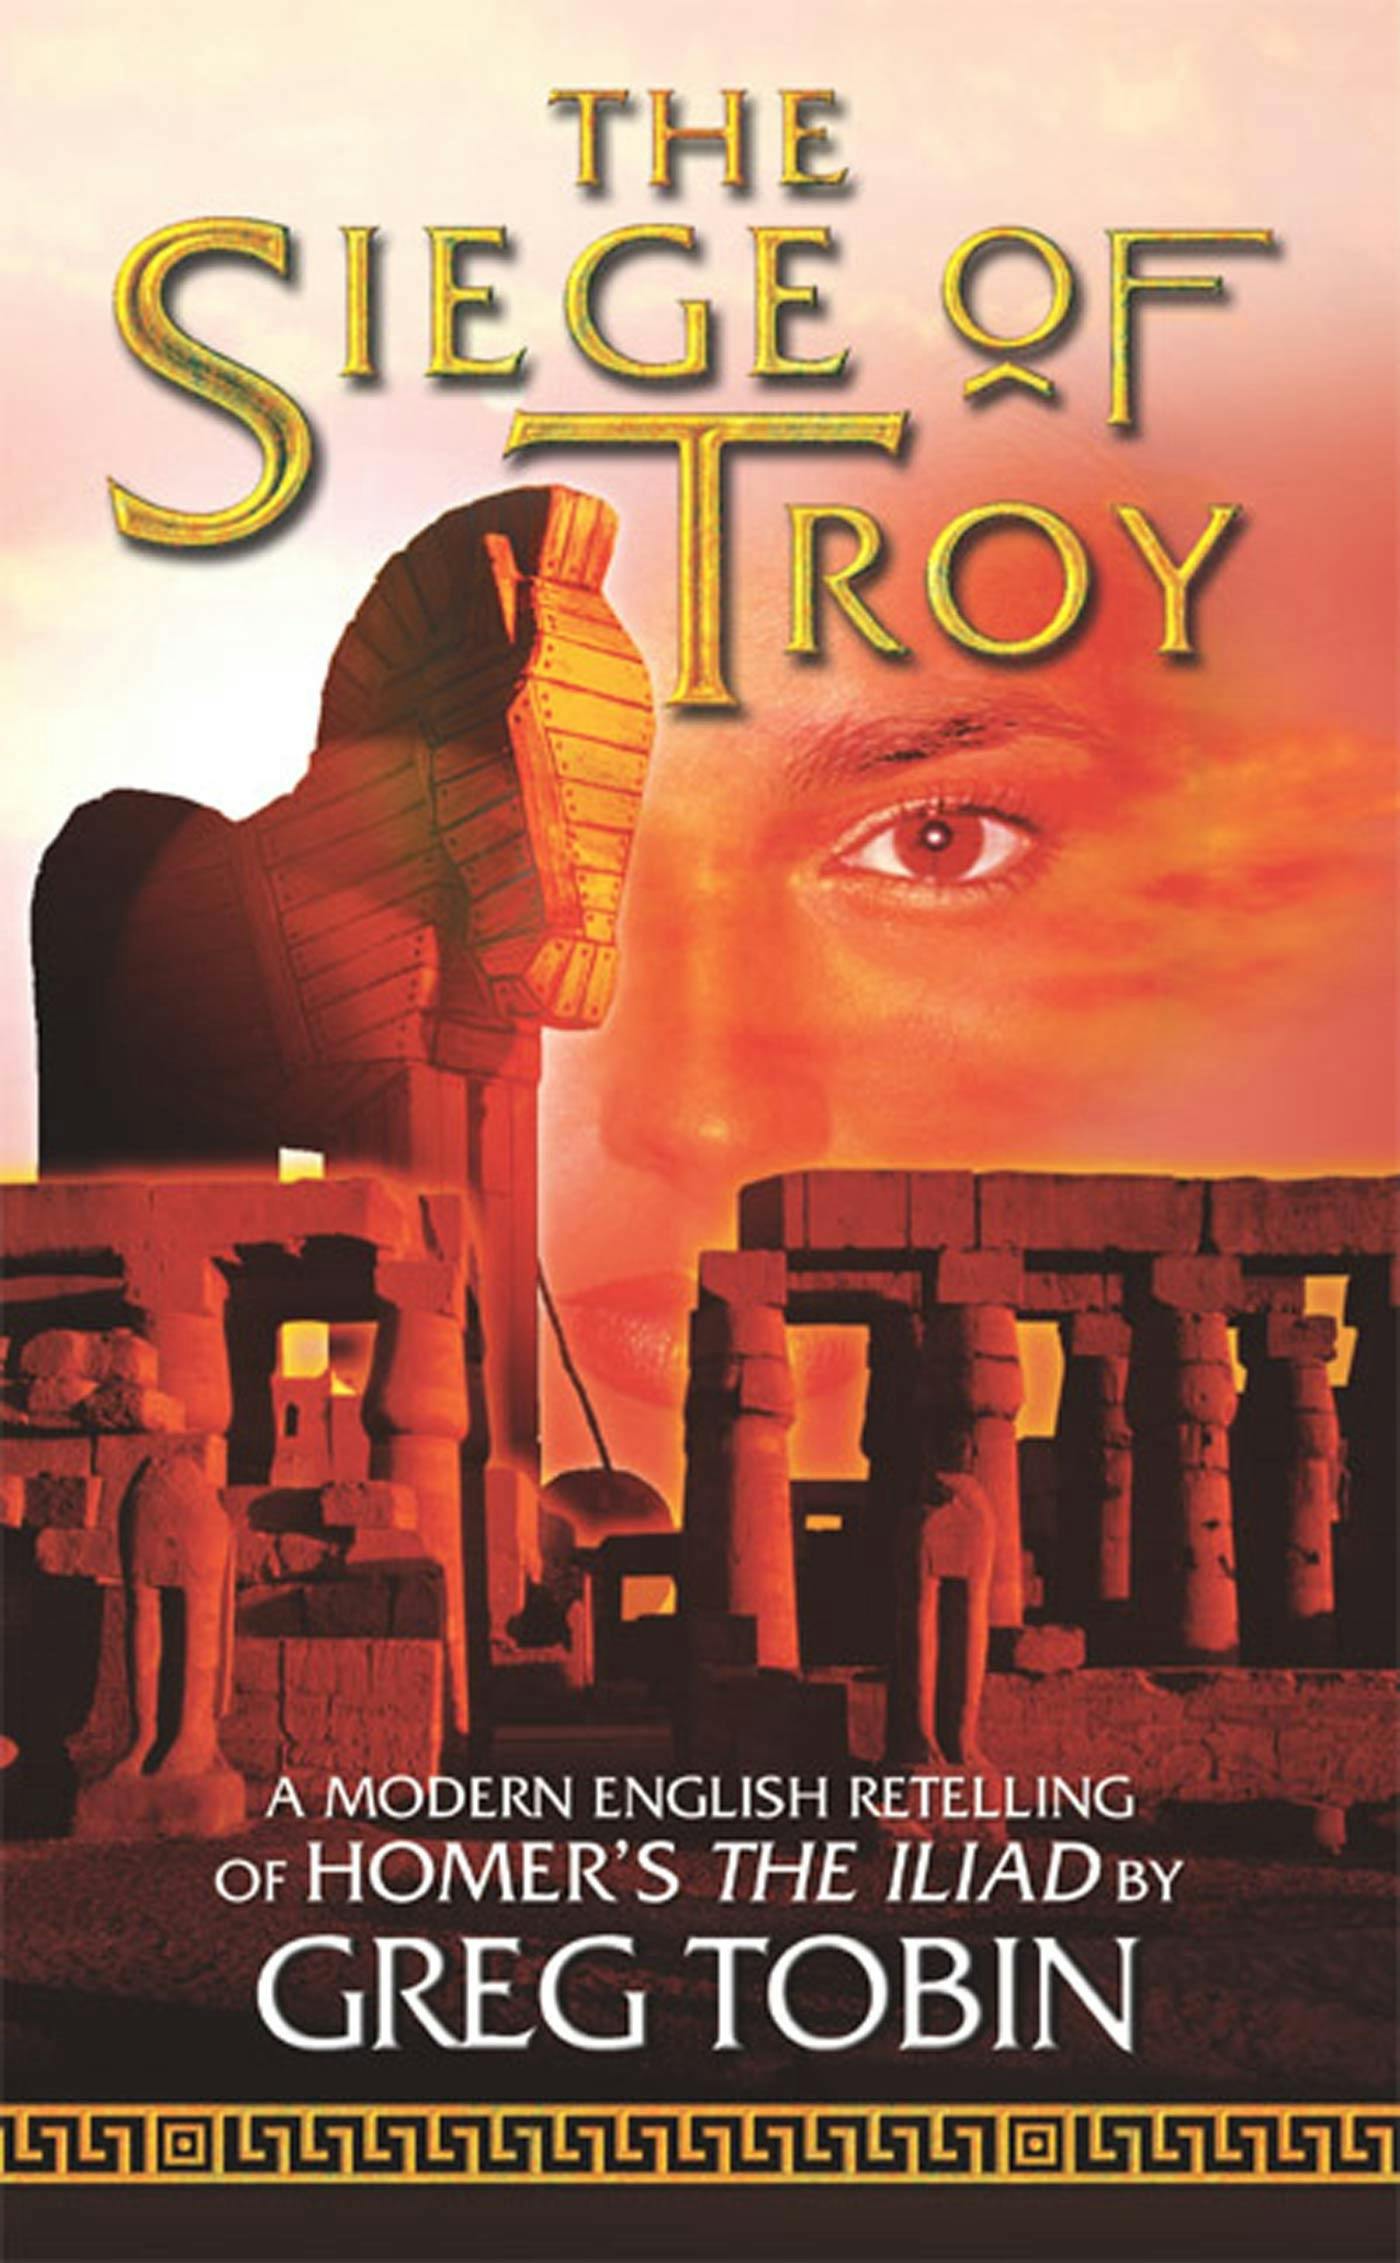 Cover for the book titled as: The Siege of Troy